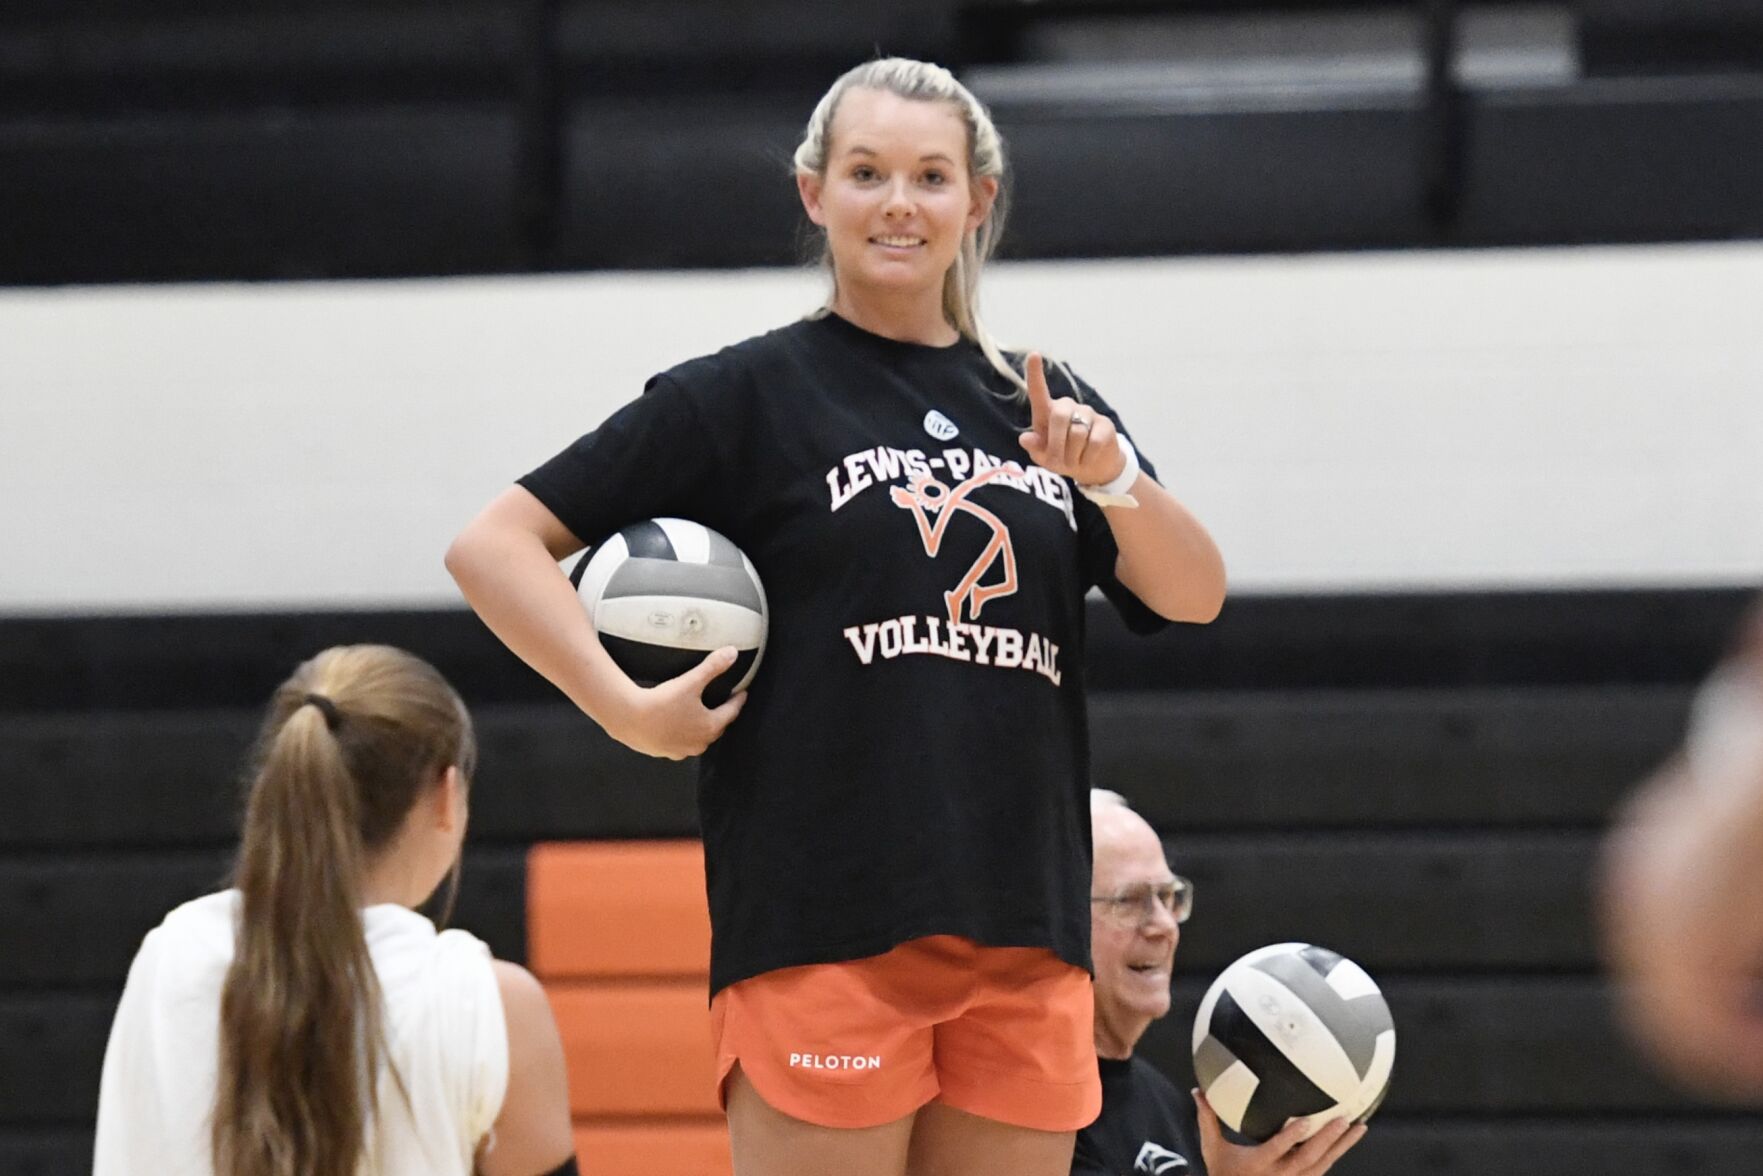 Lewis-Palmer Girls Volleyball Team: Undefeated and Thriving Under Coach Alexa Smith